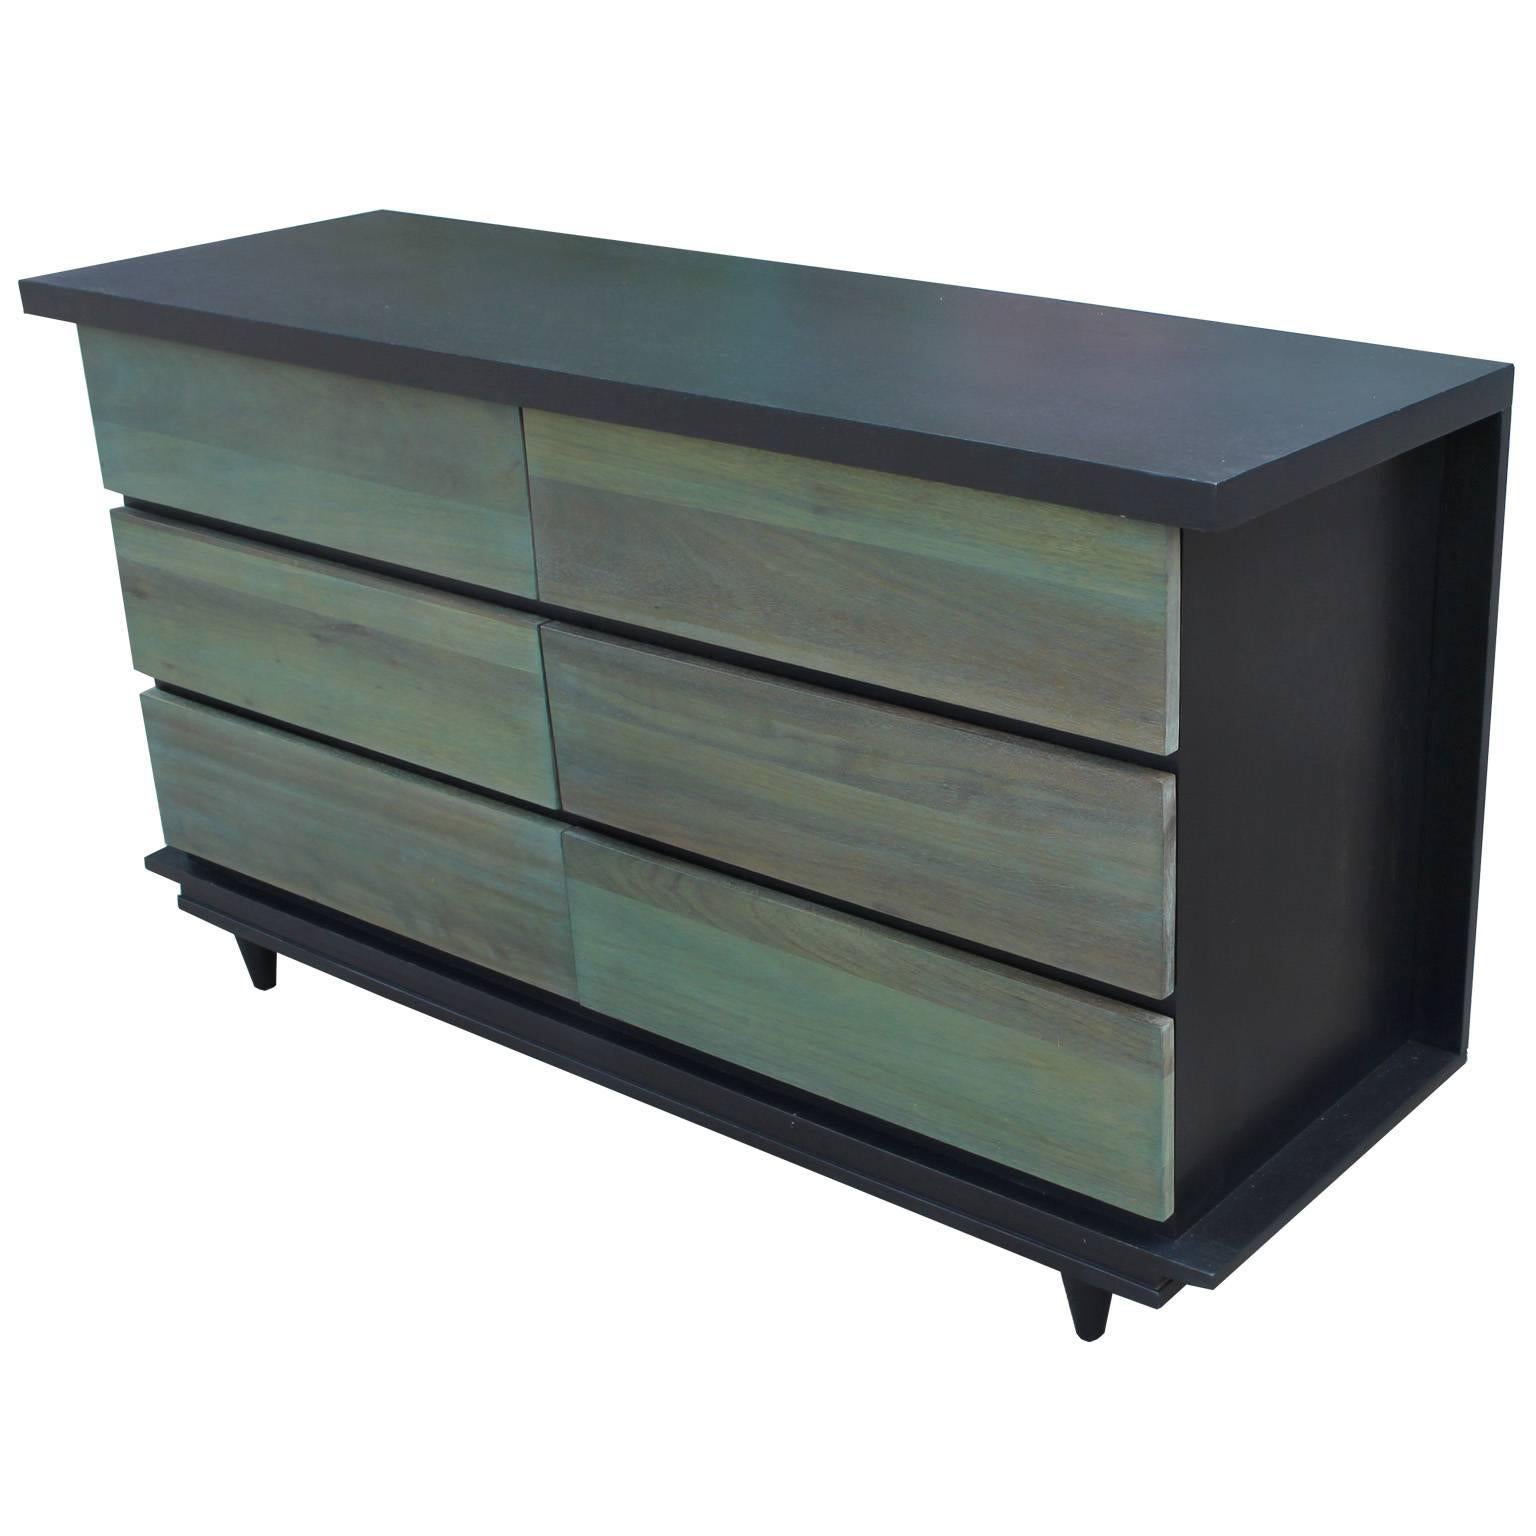 Sleek, clean lined six-drawer dresser in an unusual custom two-tone finish. Case is finished in an ebony stain and drawer fronts are in a sea green aniline dye. Six drawers provide excellent storage. Excellent POP to any space.